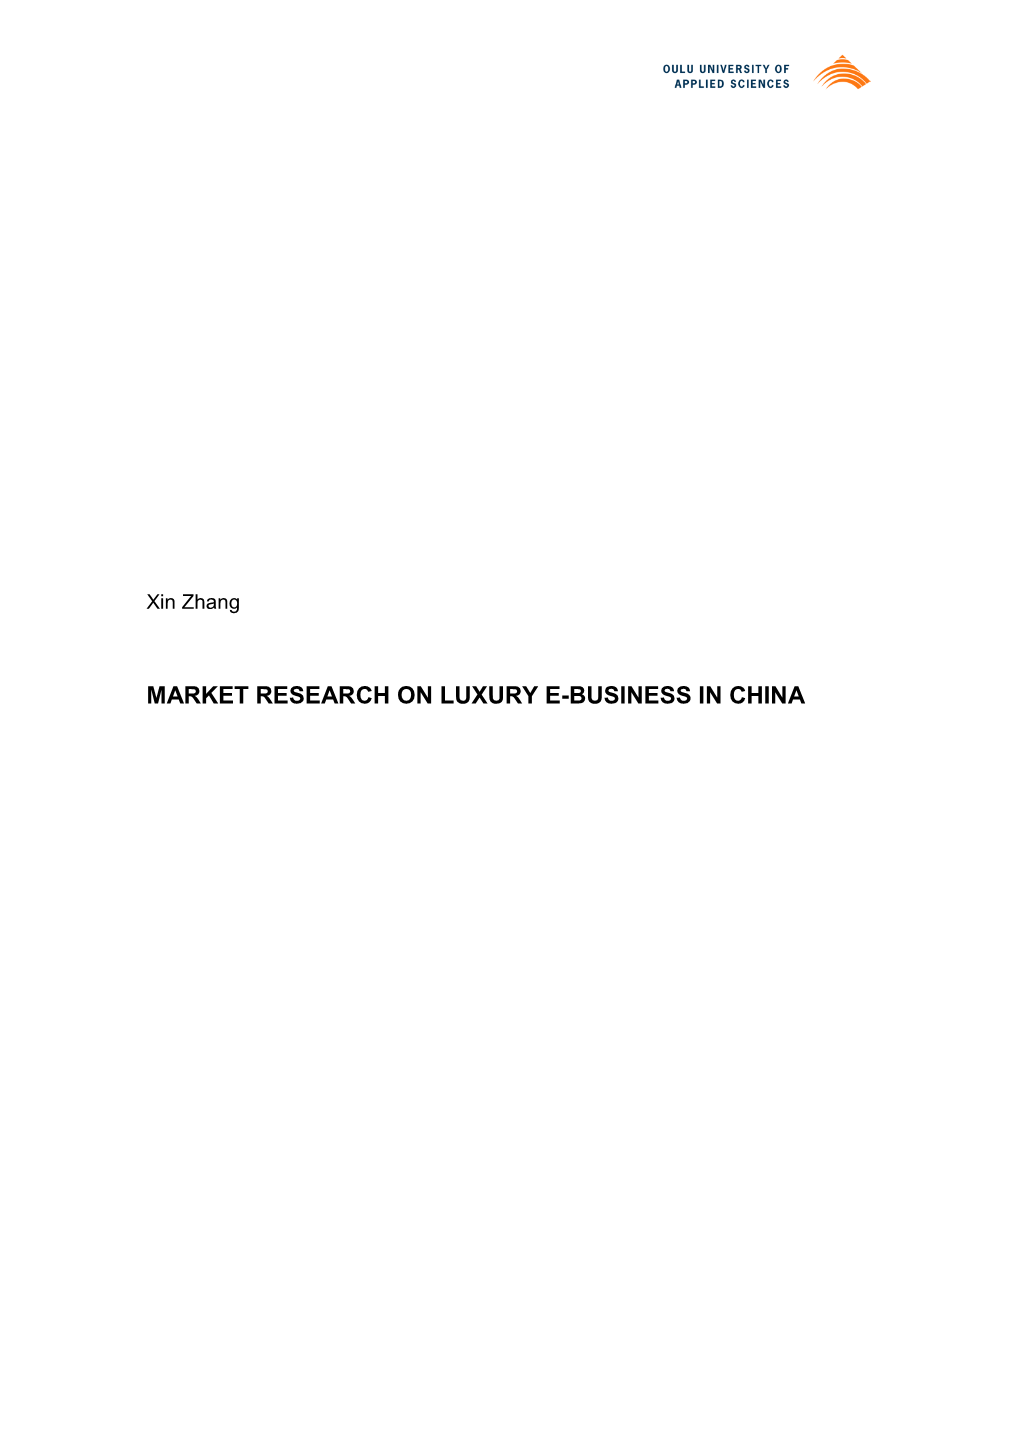 Market Research on Luxury E-Business in China